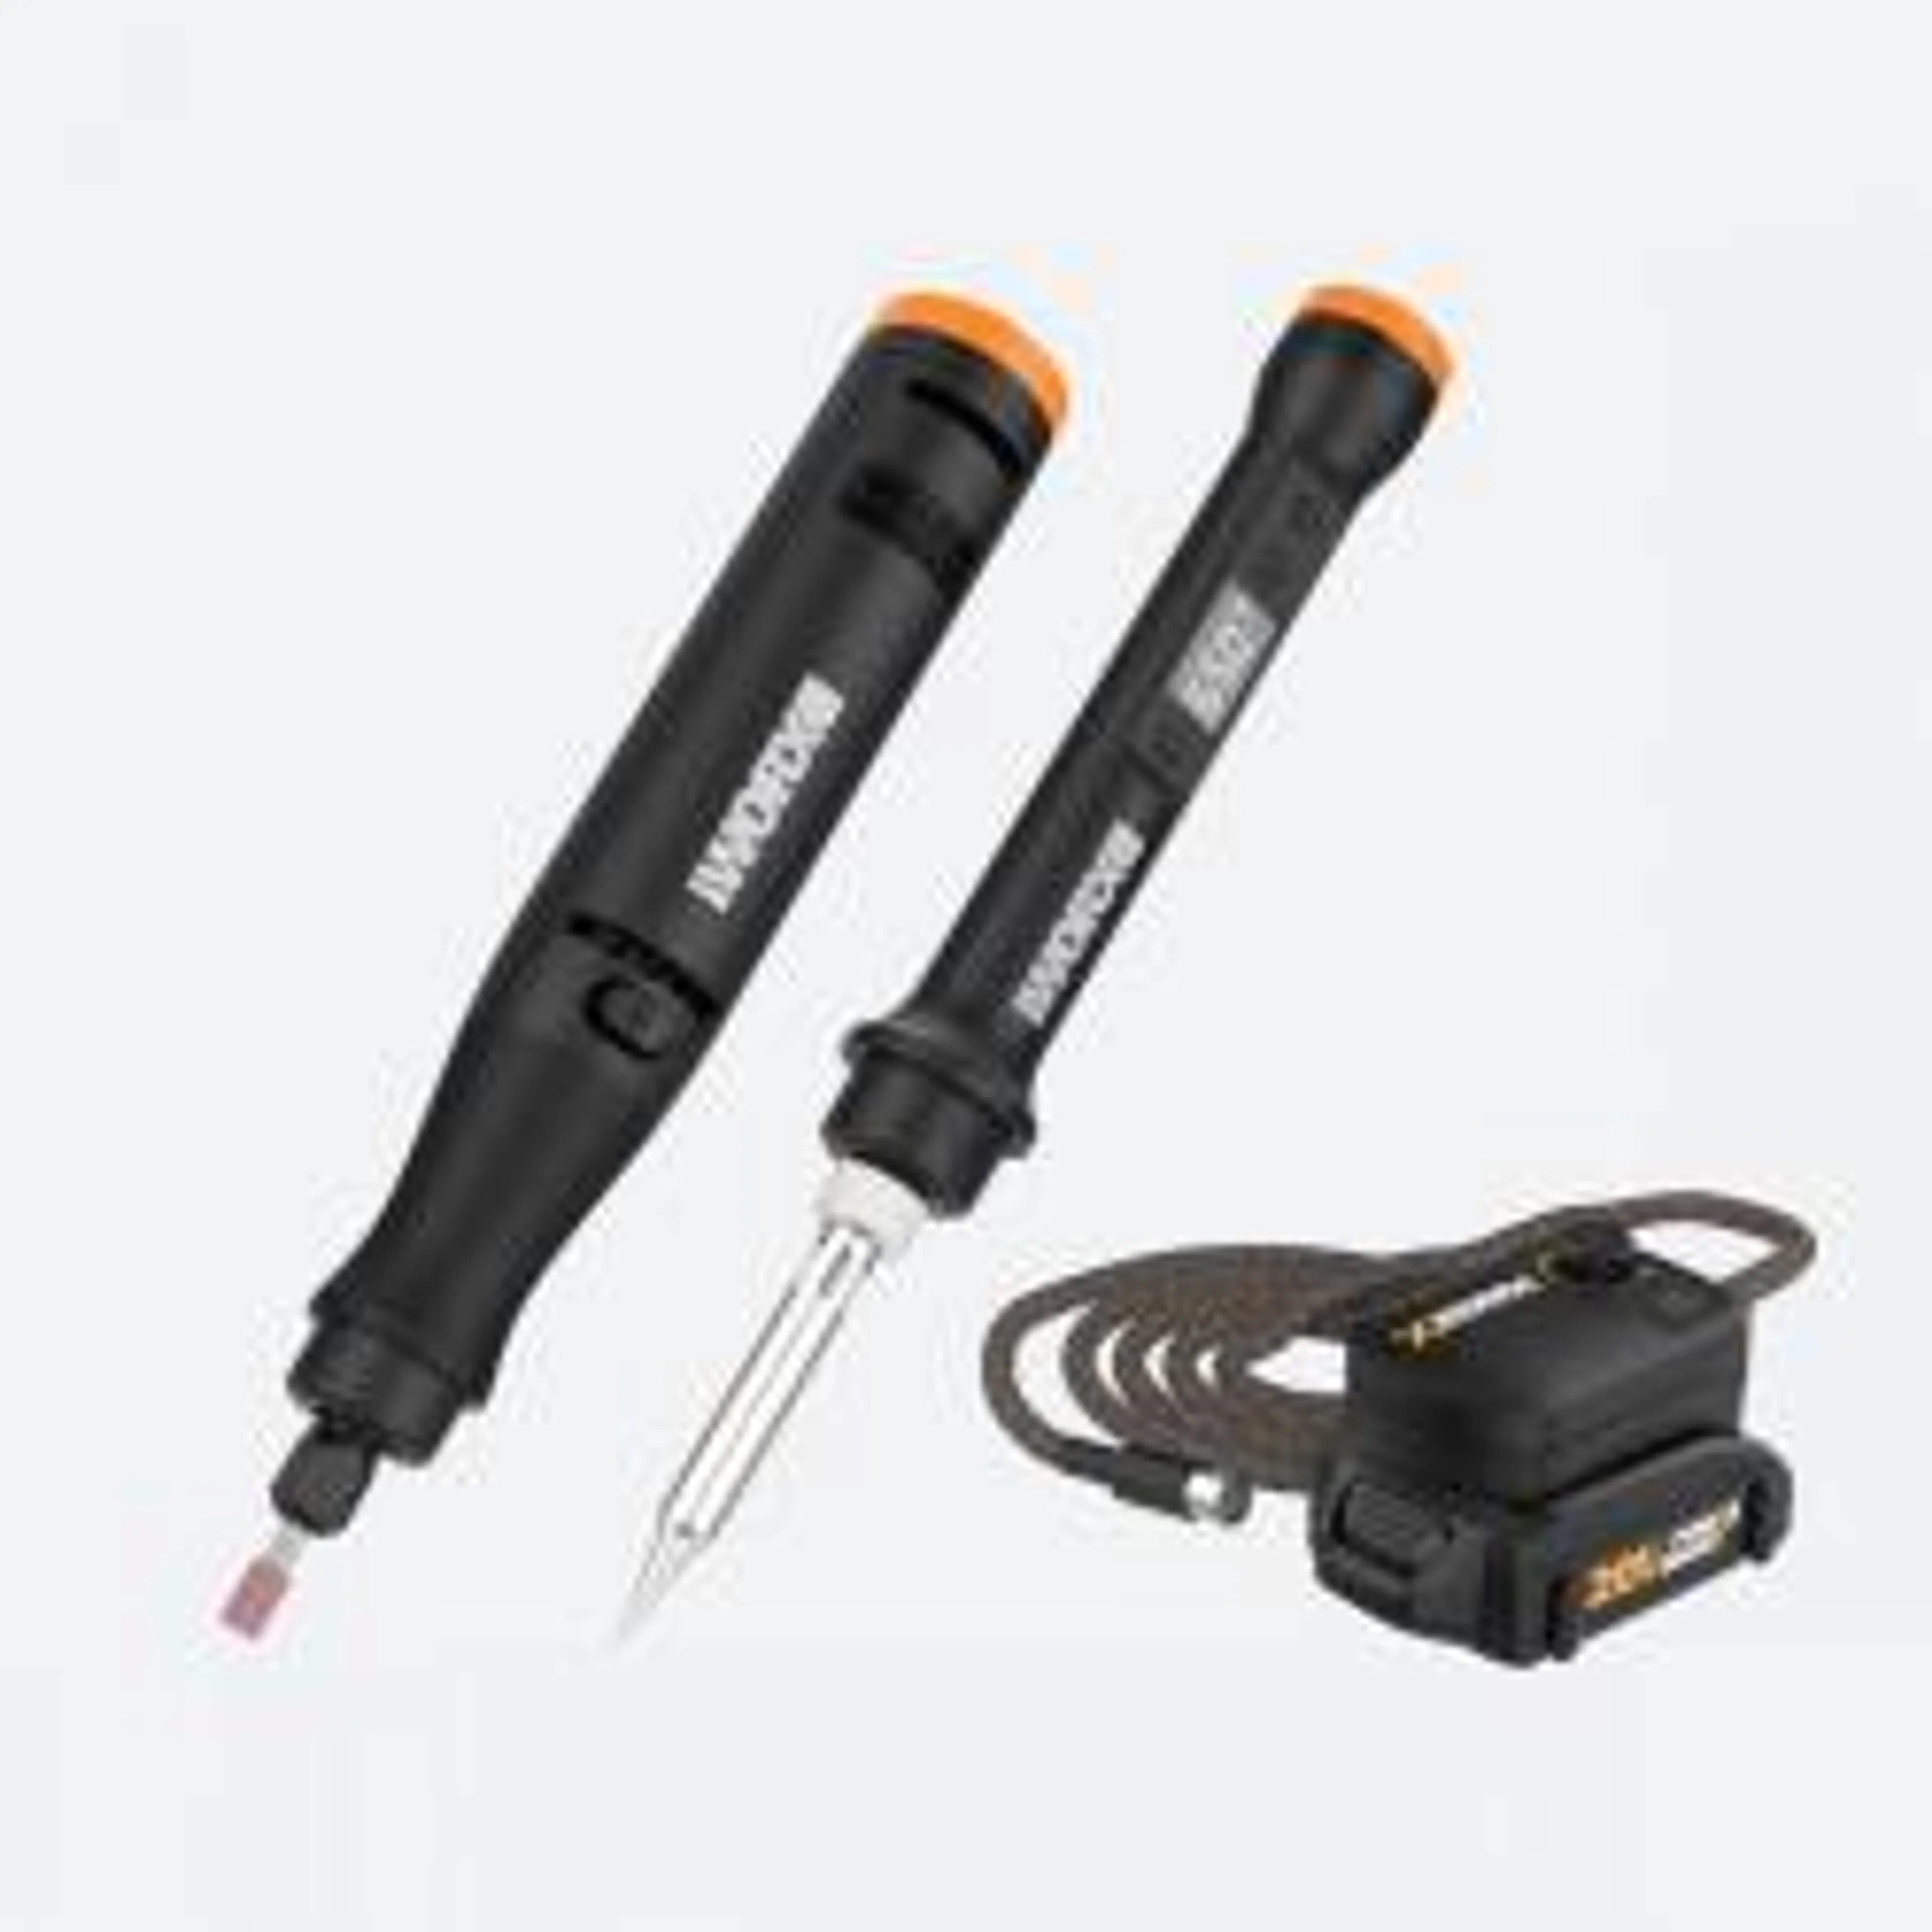 WX988L Combination Tool Kit, Battery Included, 1.5 Ah, 20 V, Lithium-Ion